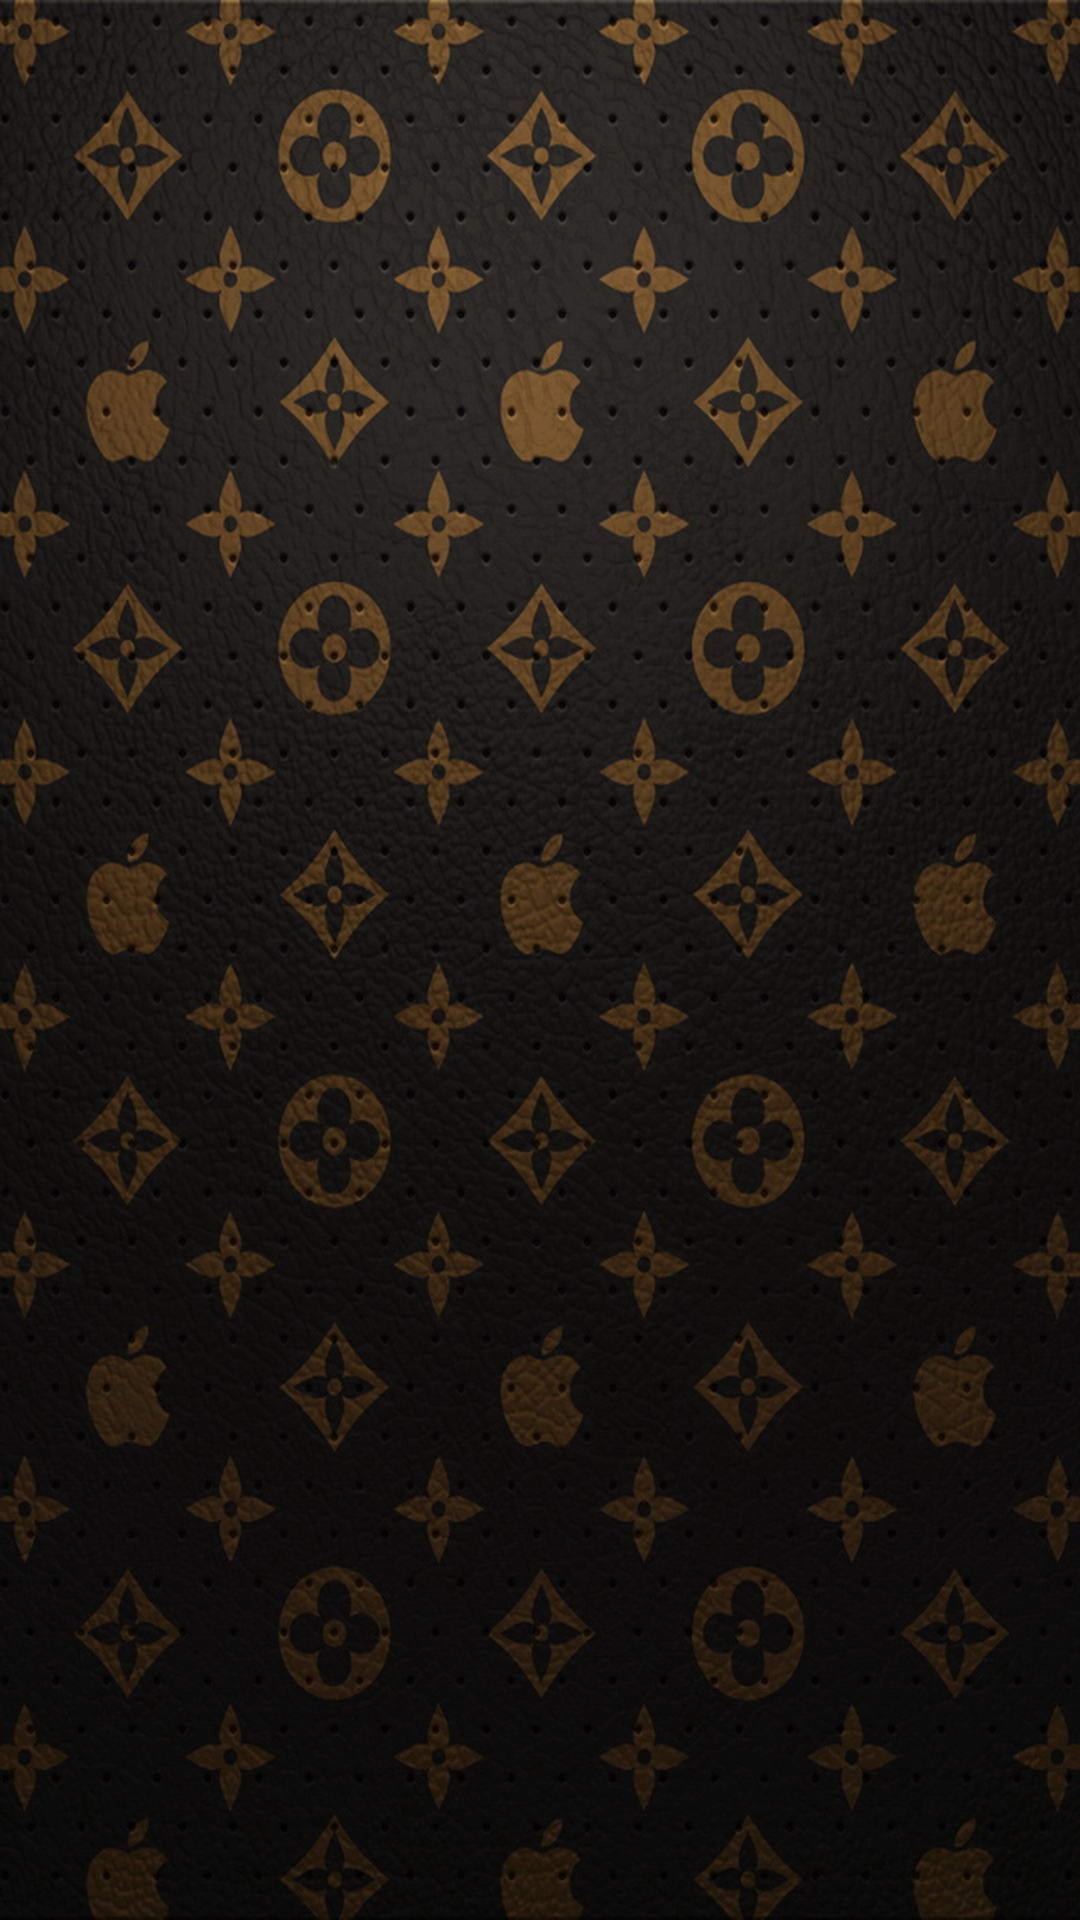 Gucci Wallpapers for iPhone Mobile | PixelsTalk.Net